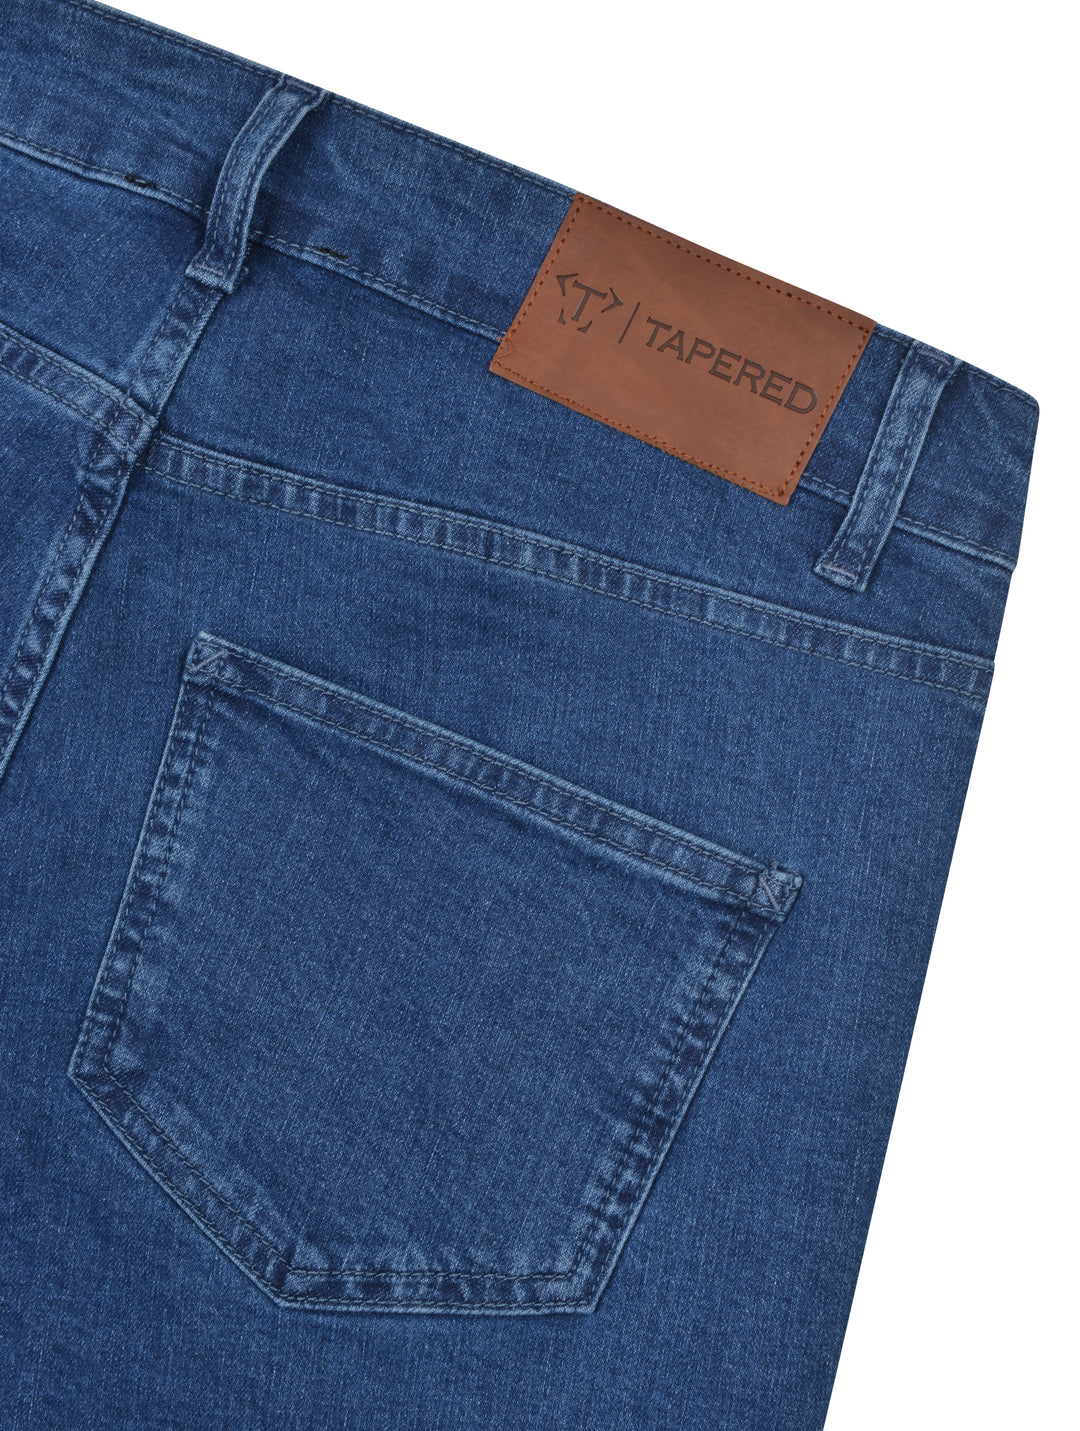 Mens Blue Tapered Jeans with Brown Leather Patch